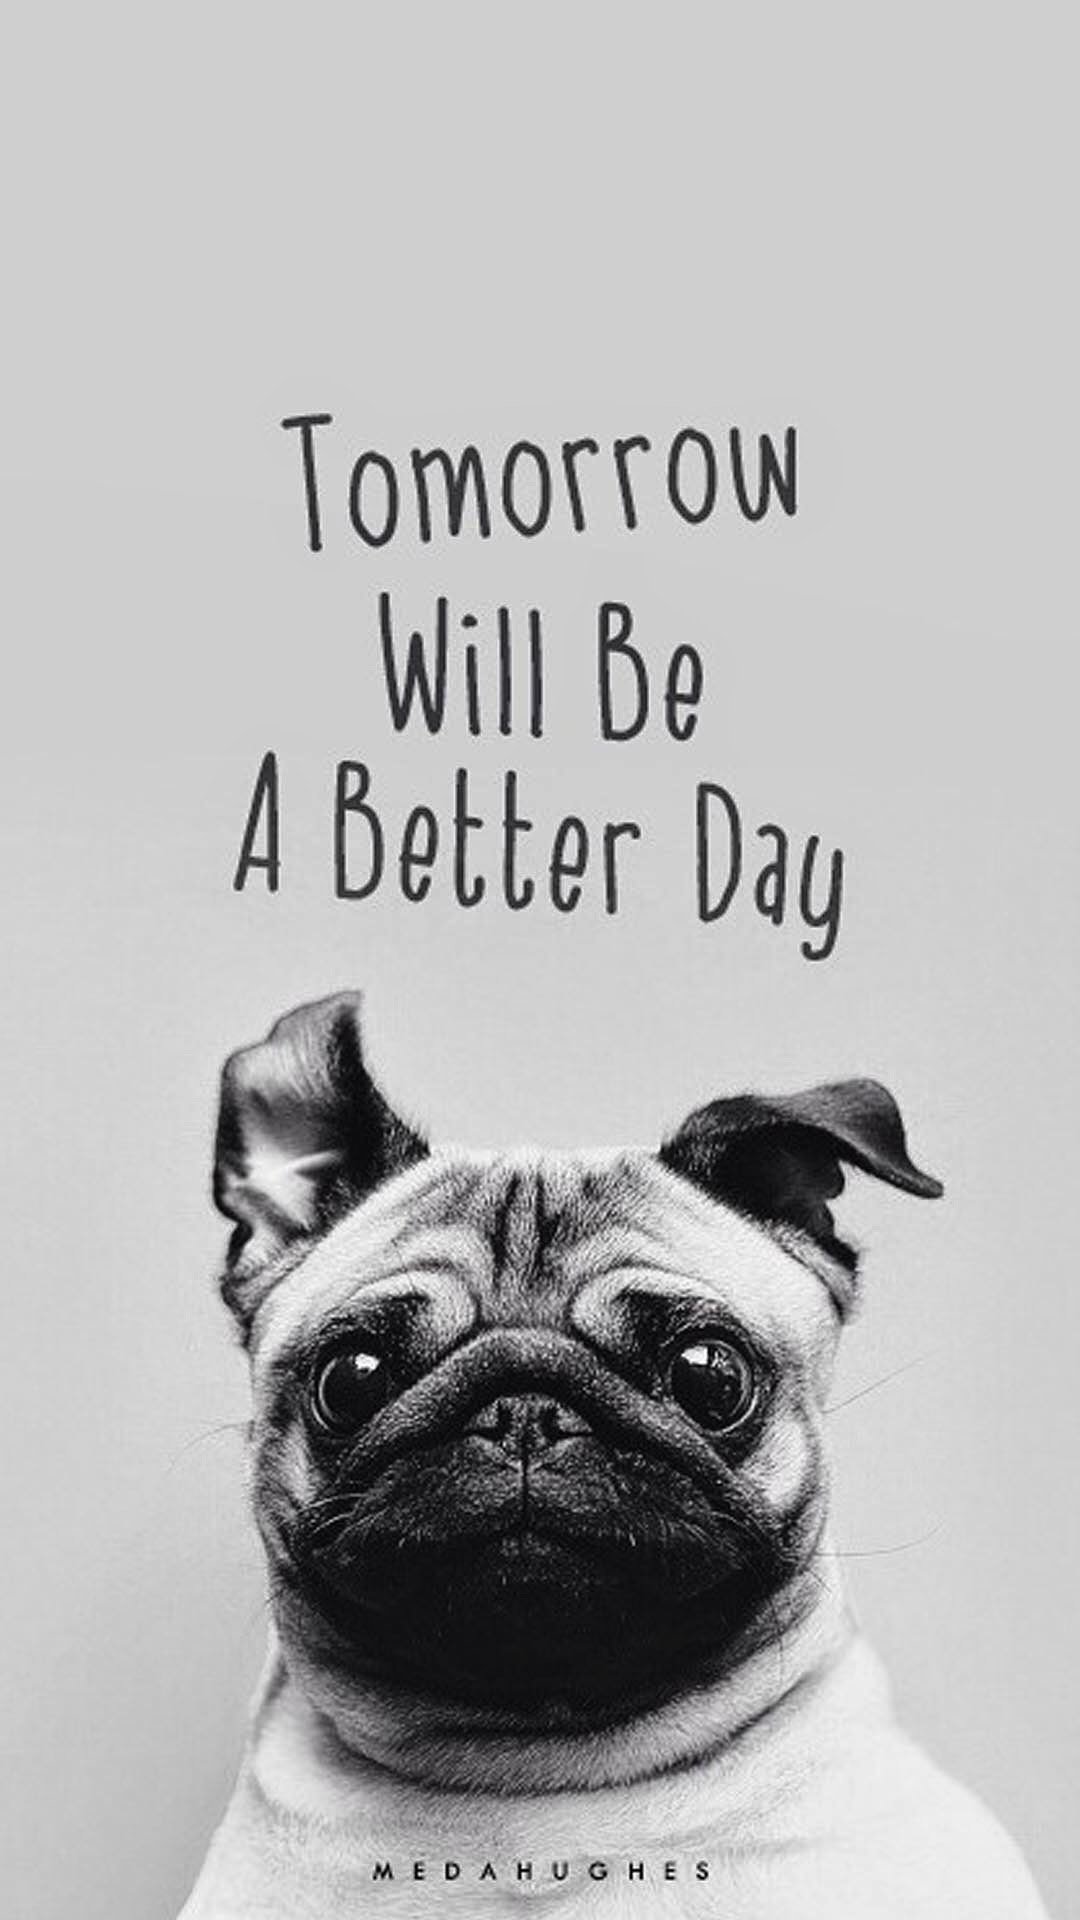 Tomorrow-Will-Be-A-Better-Day-Pug-Face-iPhone-6-Plus-HD-Wallpaper.j